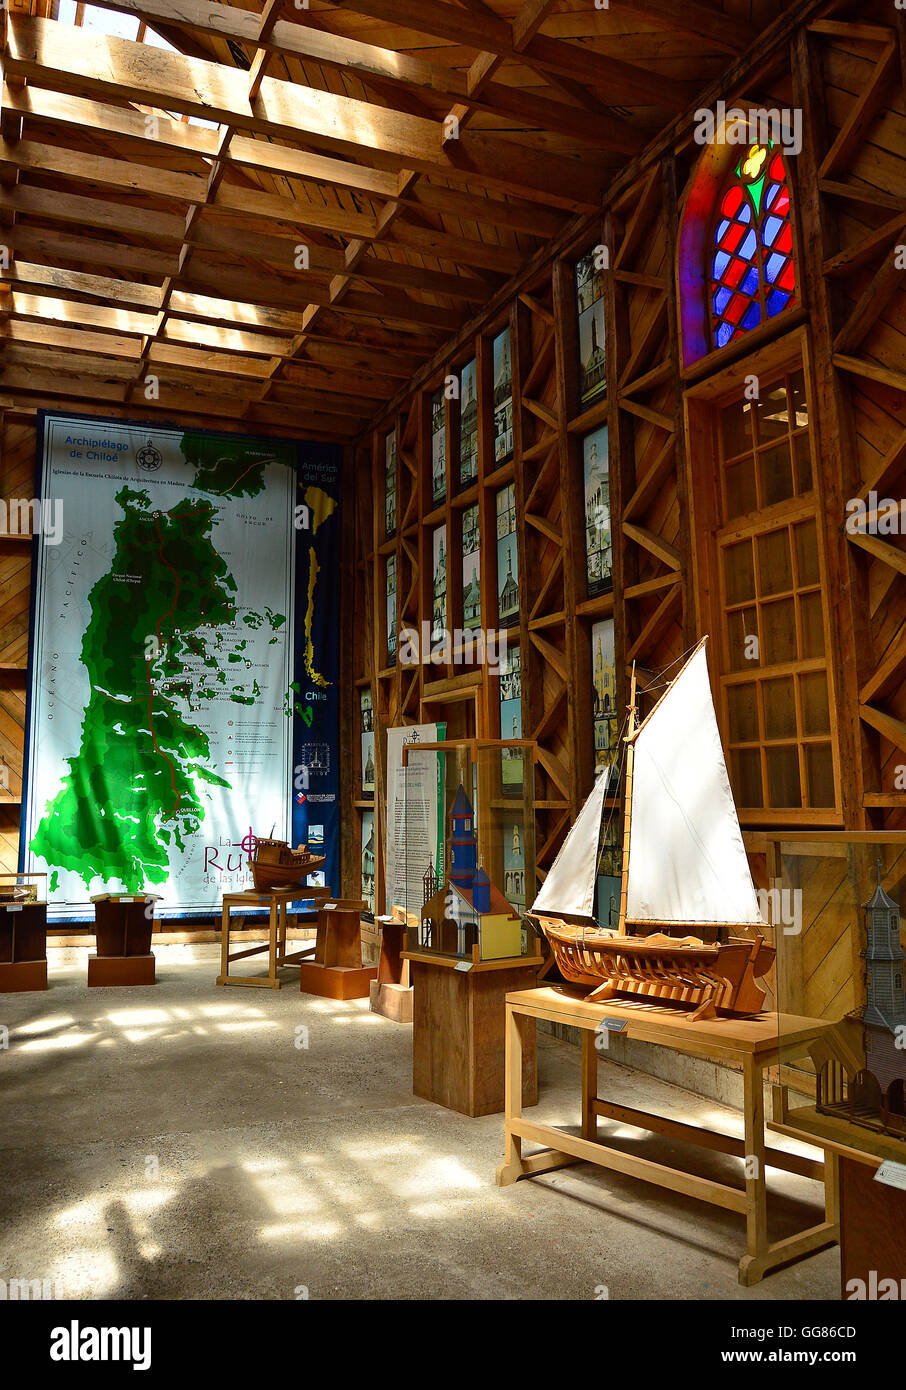 Exhibit at the Museo de las Iglesias de Chiloe, showing a model wooden sailing boat, a map of Chiloe Island, and stained glass. Stock Photo